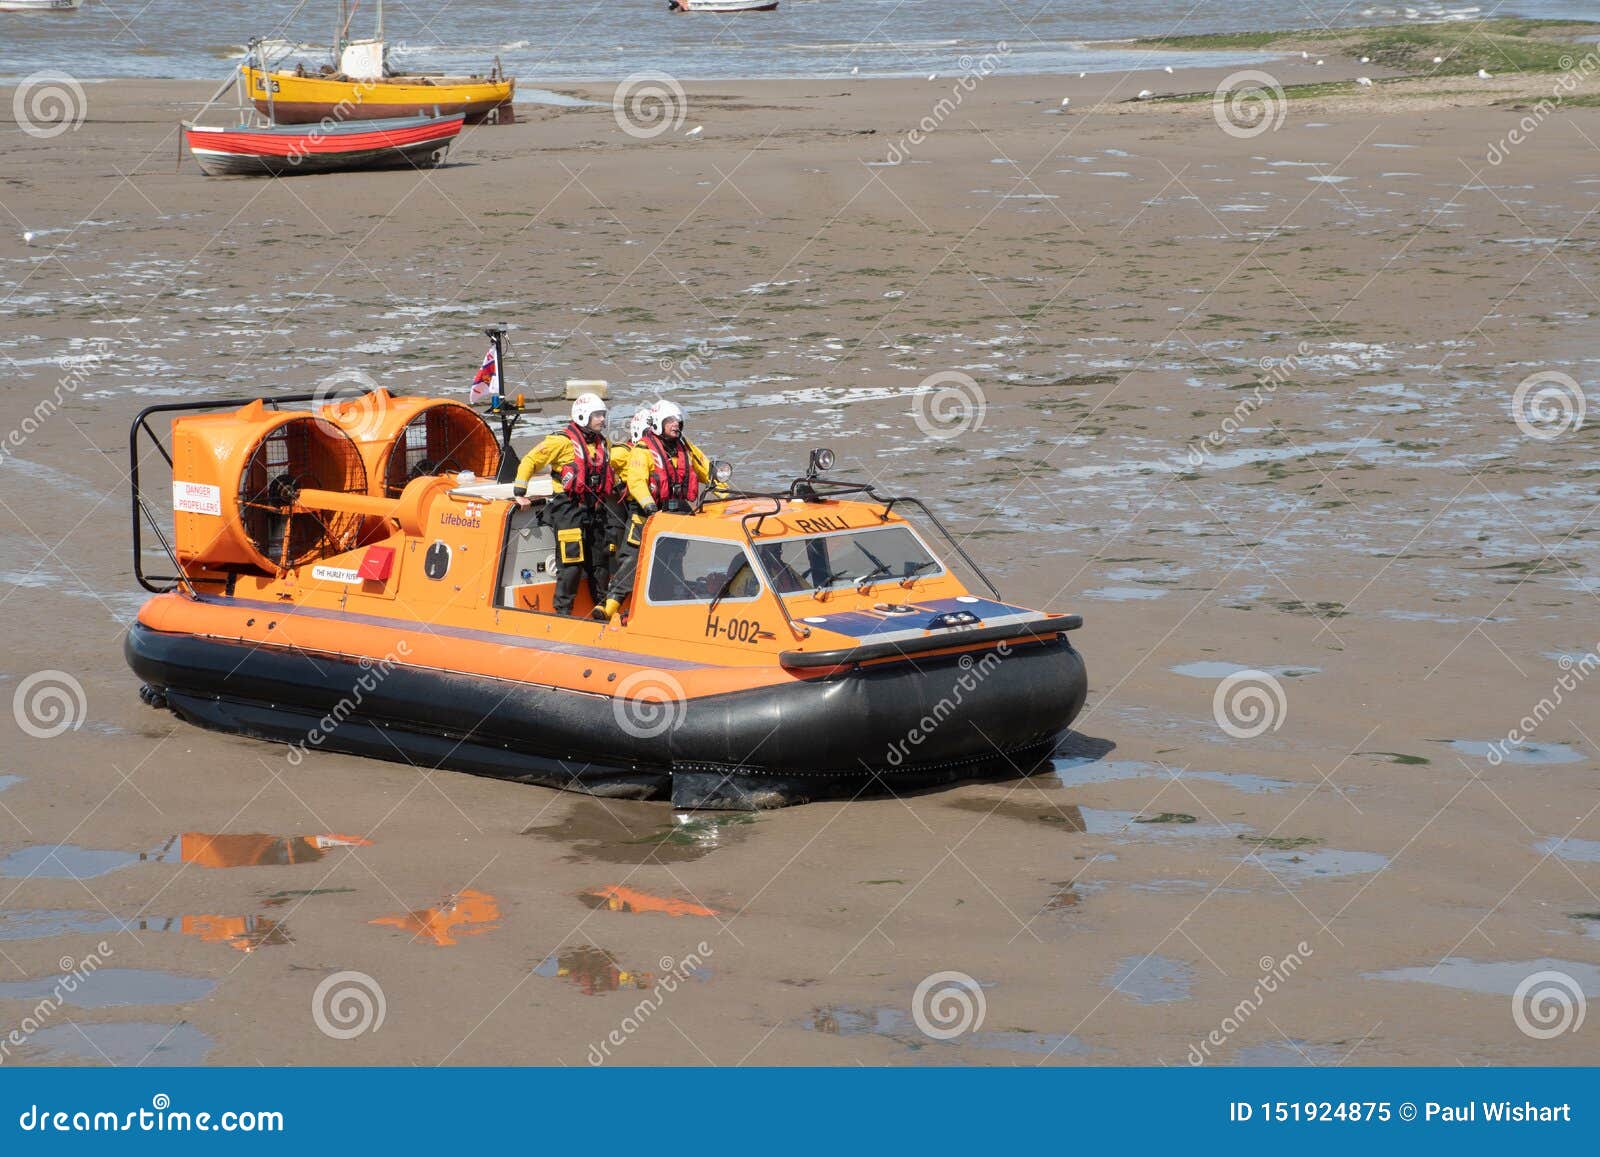 RNLI Rescue Hovercraft With Crew On Beach Editorial Image ...